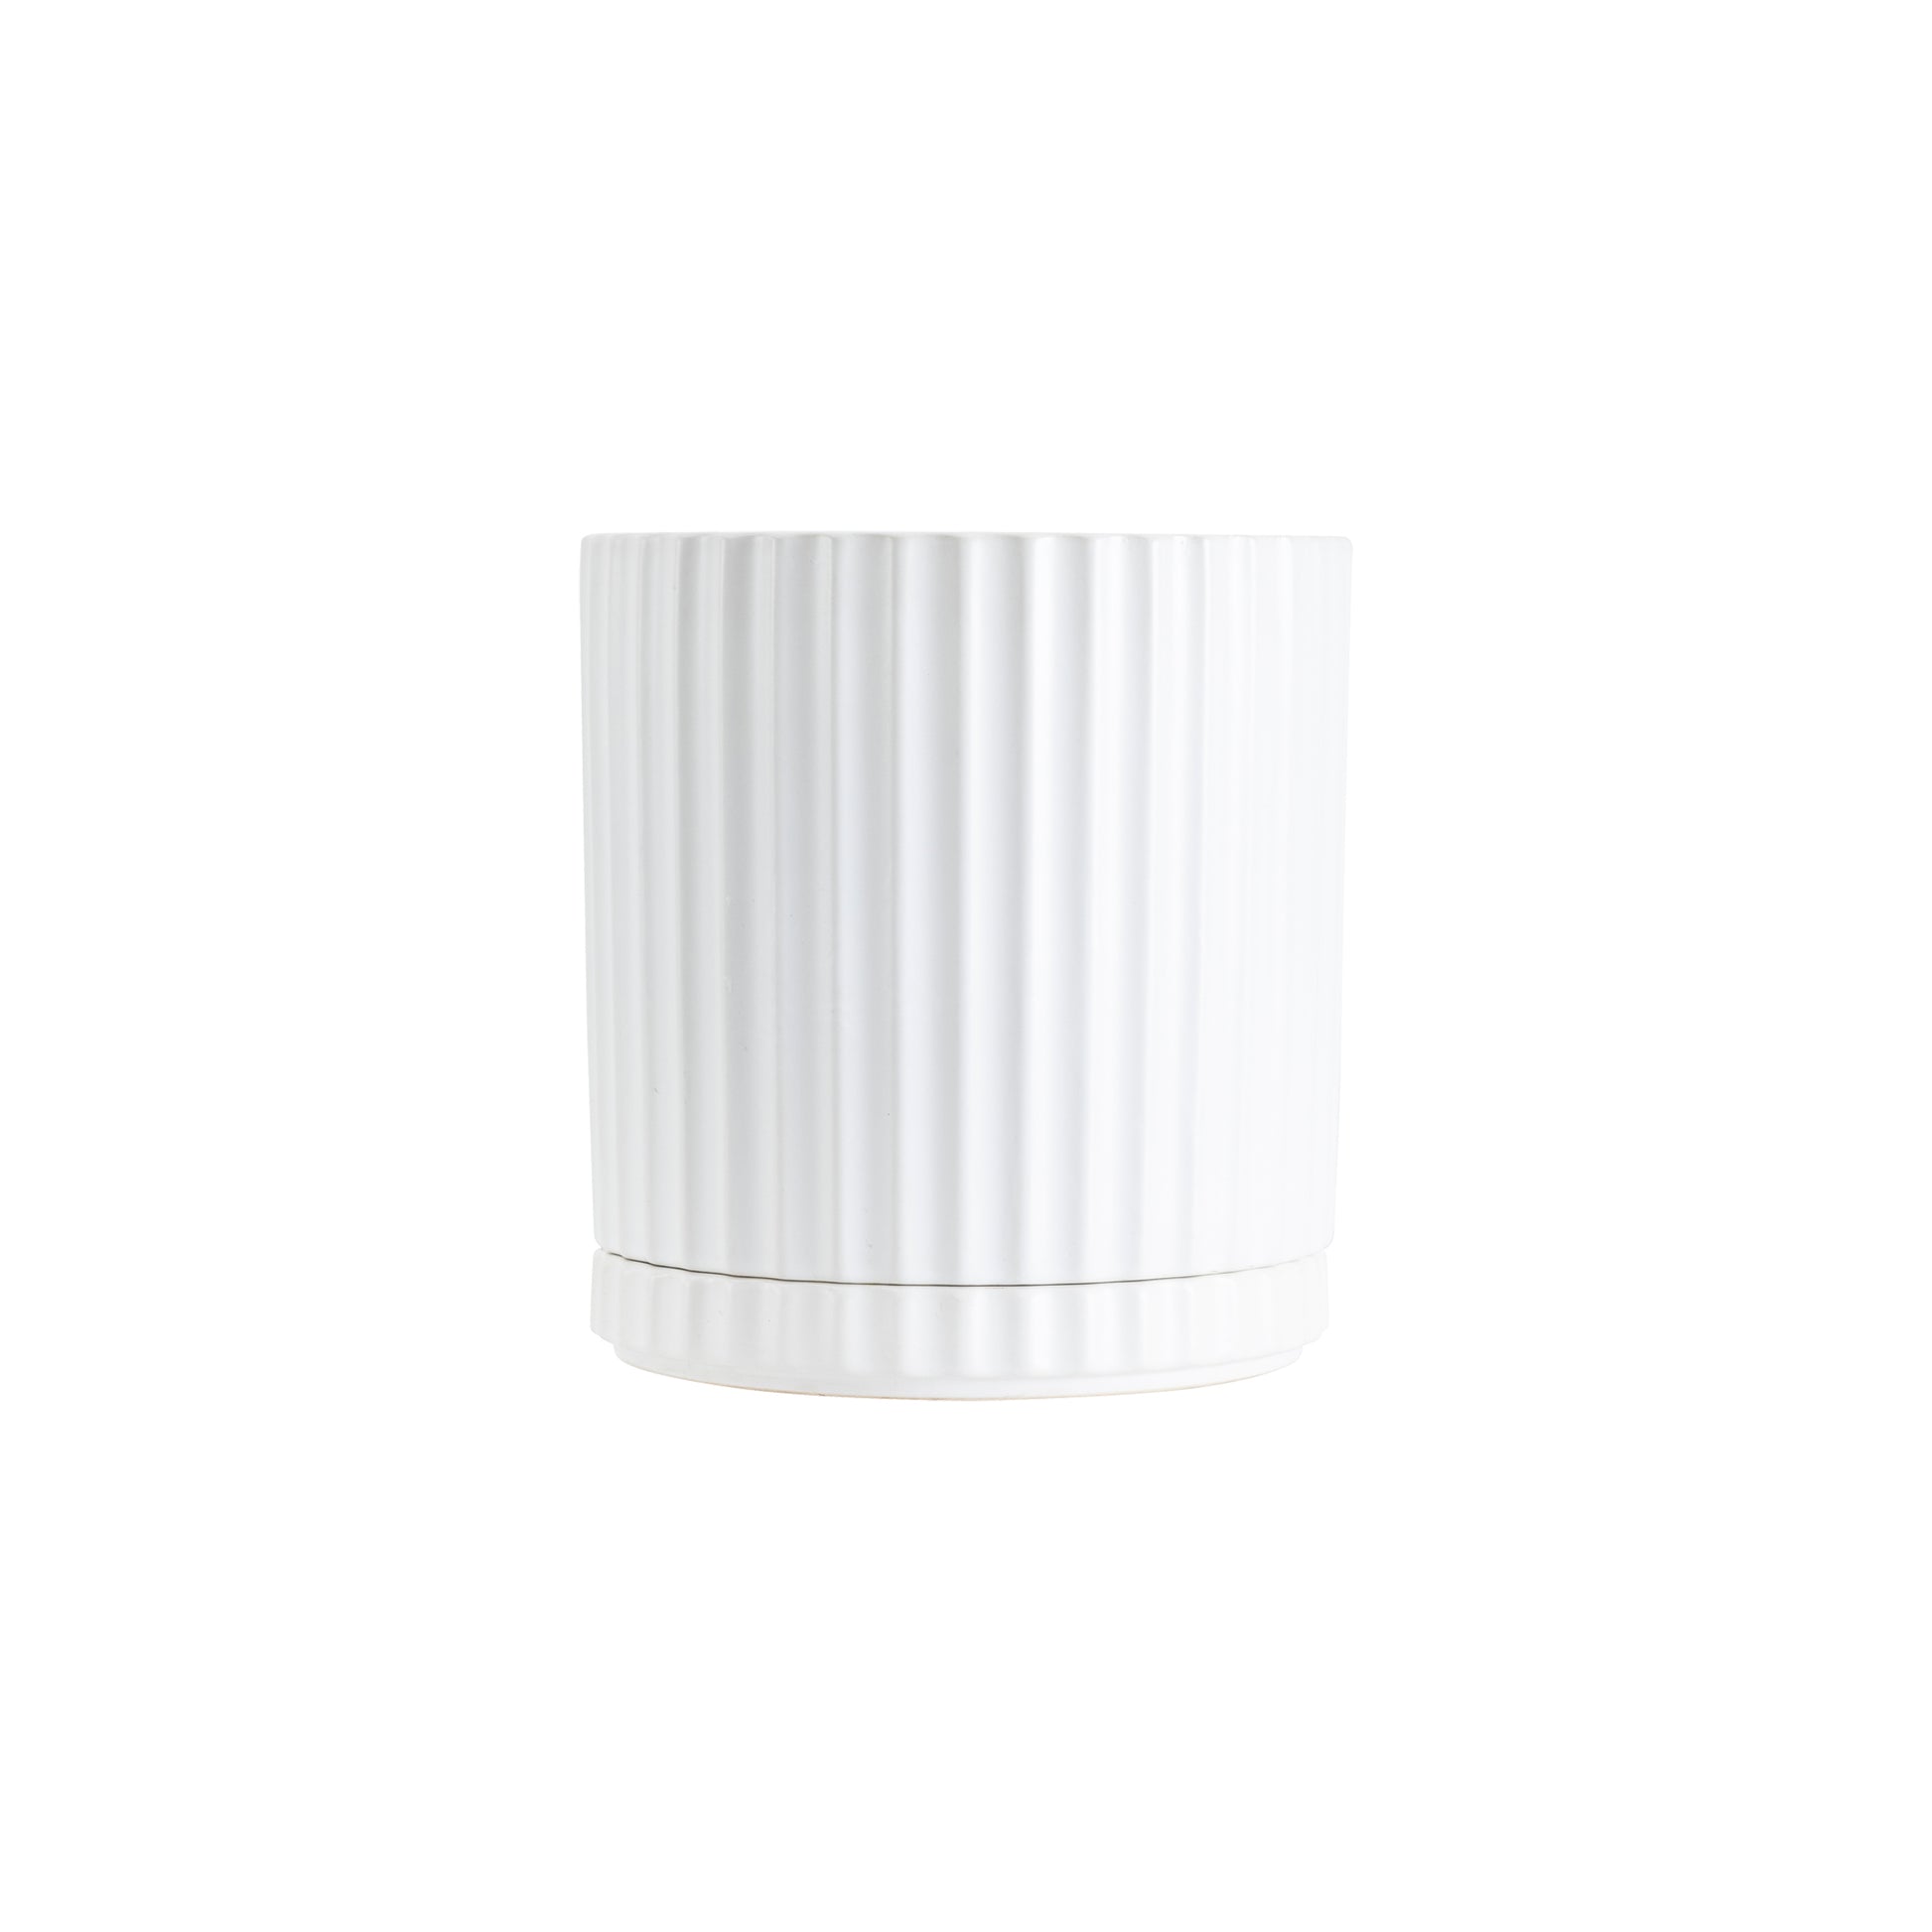 Inspired by the pillars at the Acropolis, the Athens planter in white combines classic style with the functionality of a drainage hole and matching saucer.   Mix and match plant pots to add personality and greenery to any space.  Colour: white  Dimensions: 16.5cm internal diameter x 19cm high